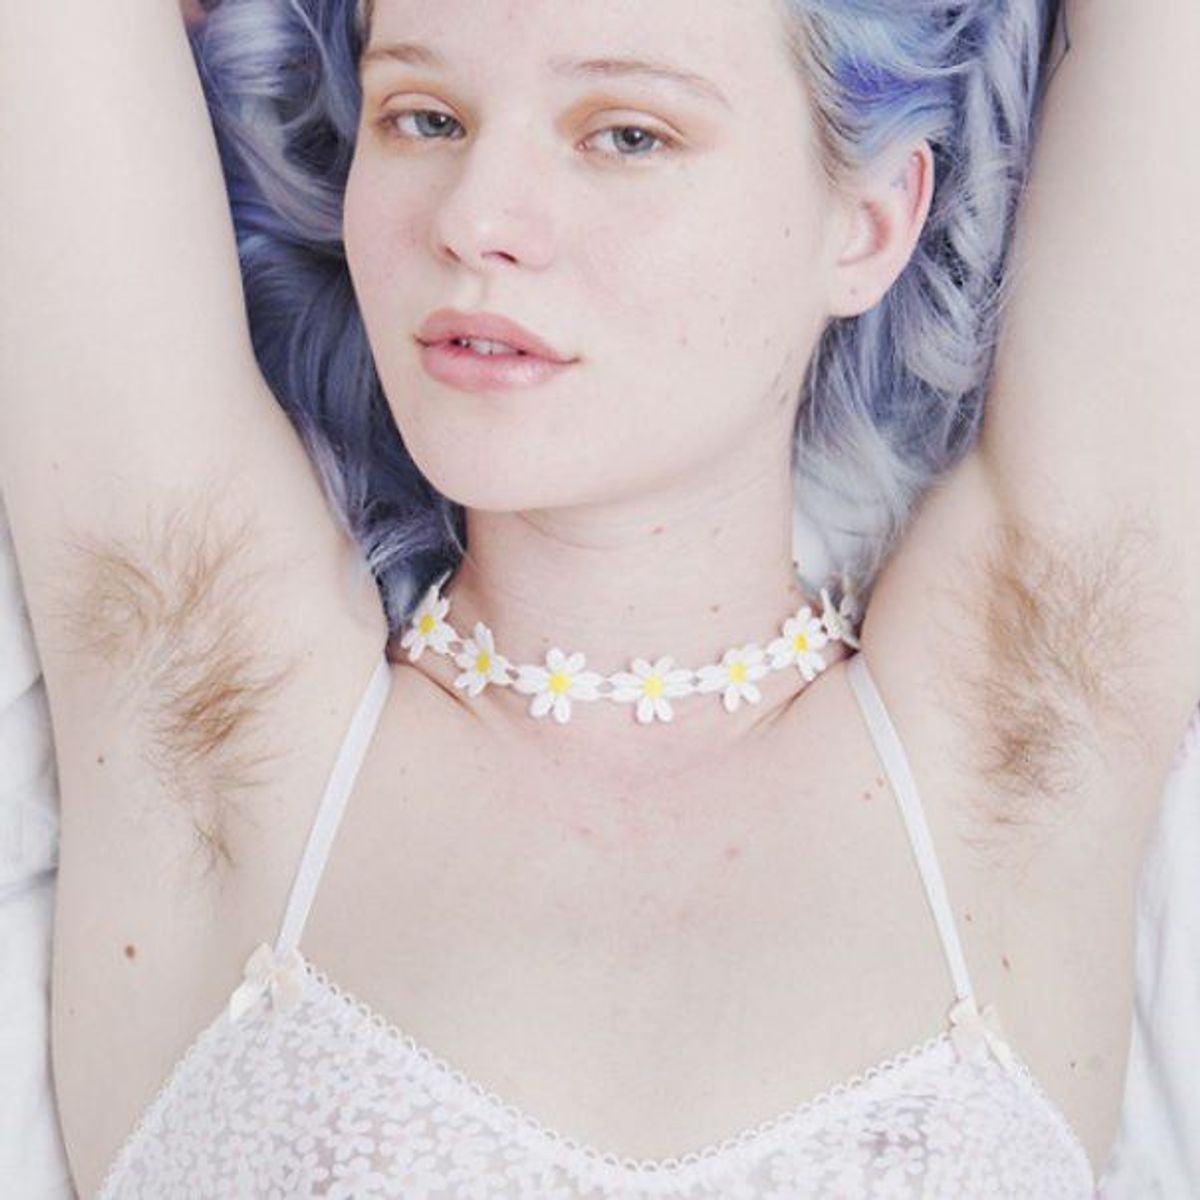 Body Hair Chooses Who You Are Before You Can